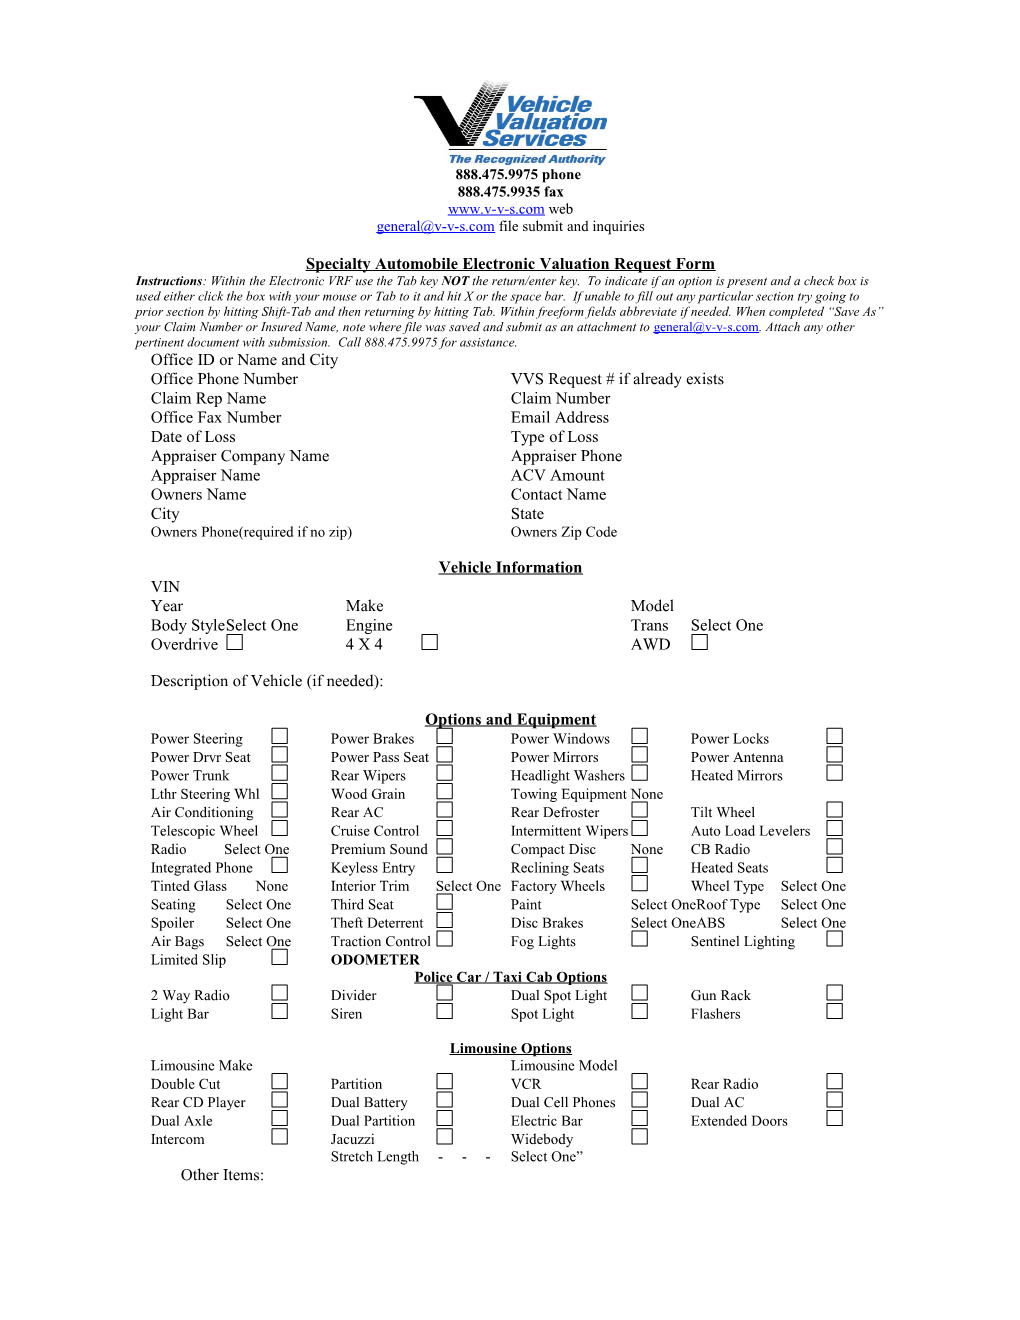 Specialty Automobile Electronic Valuation Request Form